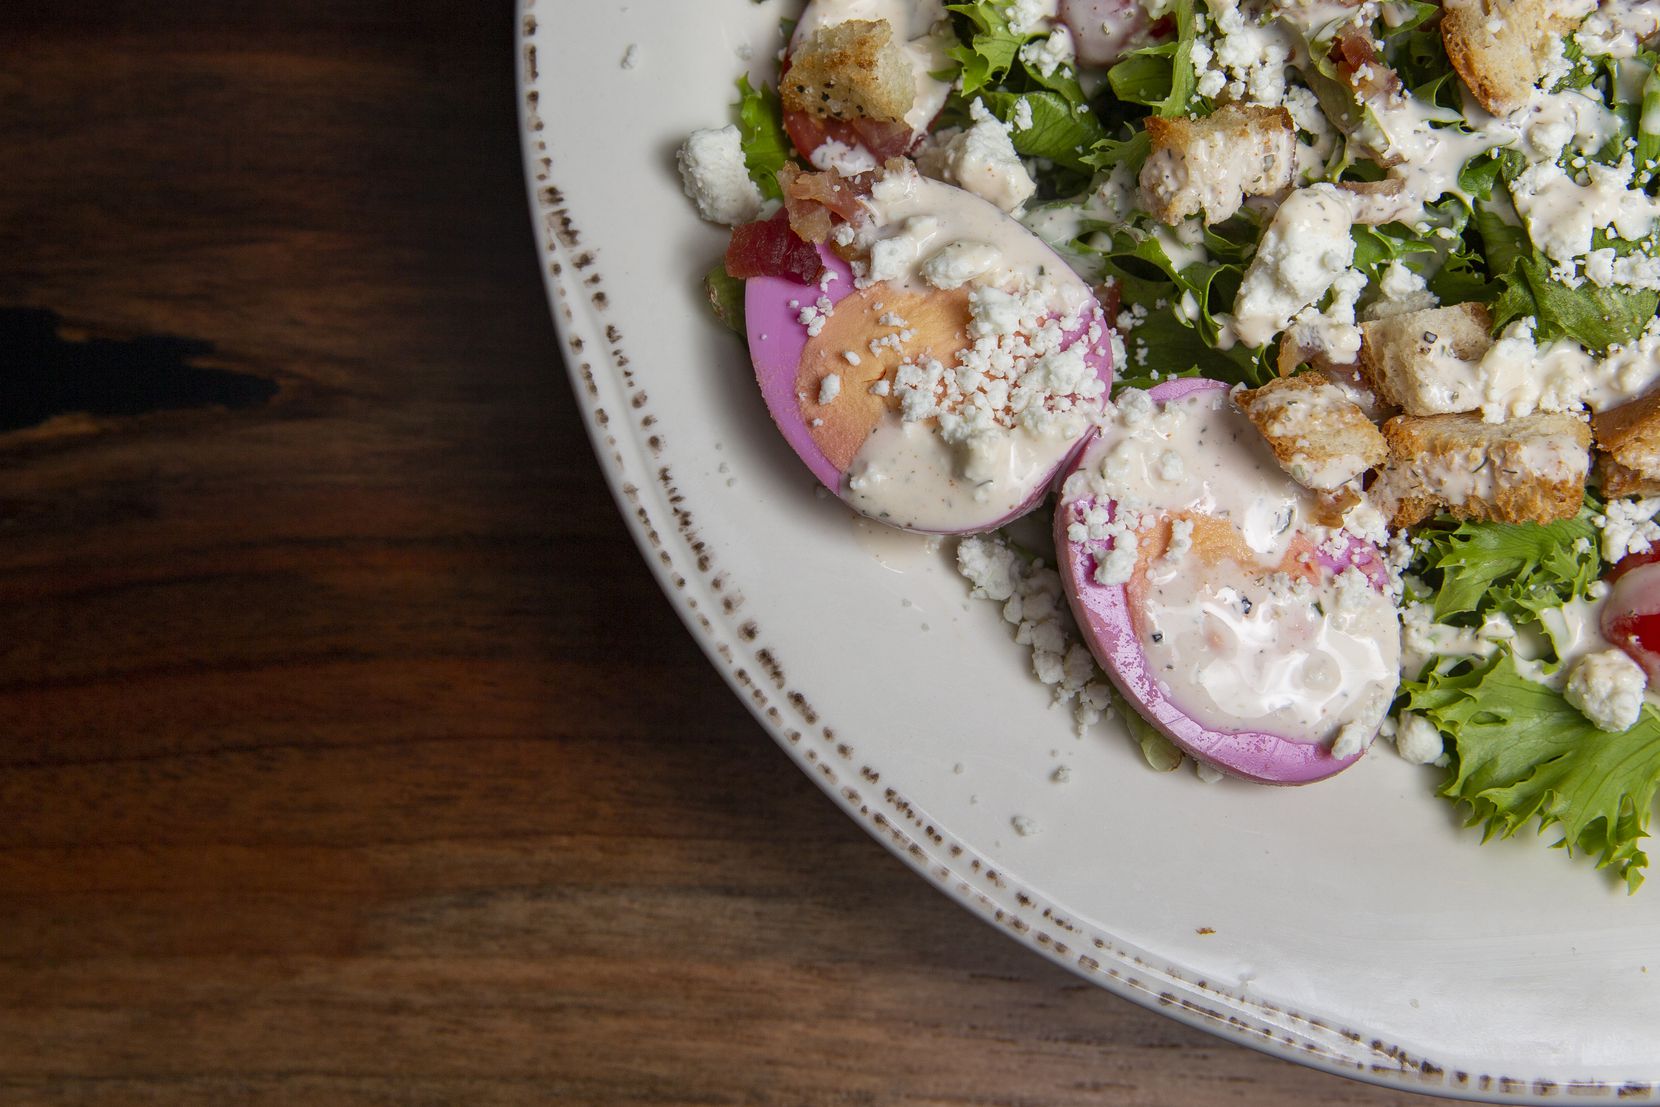 Purple pickled eggs for TCU are served with the Cobb salad as a way to honor owner Maurice Ahern's late son Micah and his devotion to the baseball team at Grounds & Gold Coffee Co.